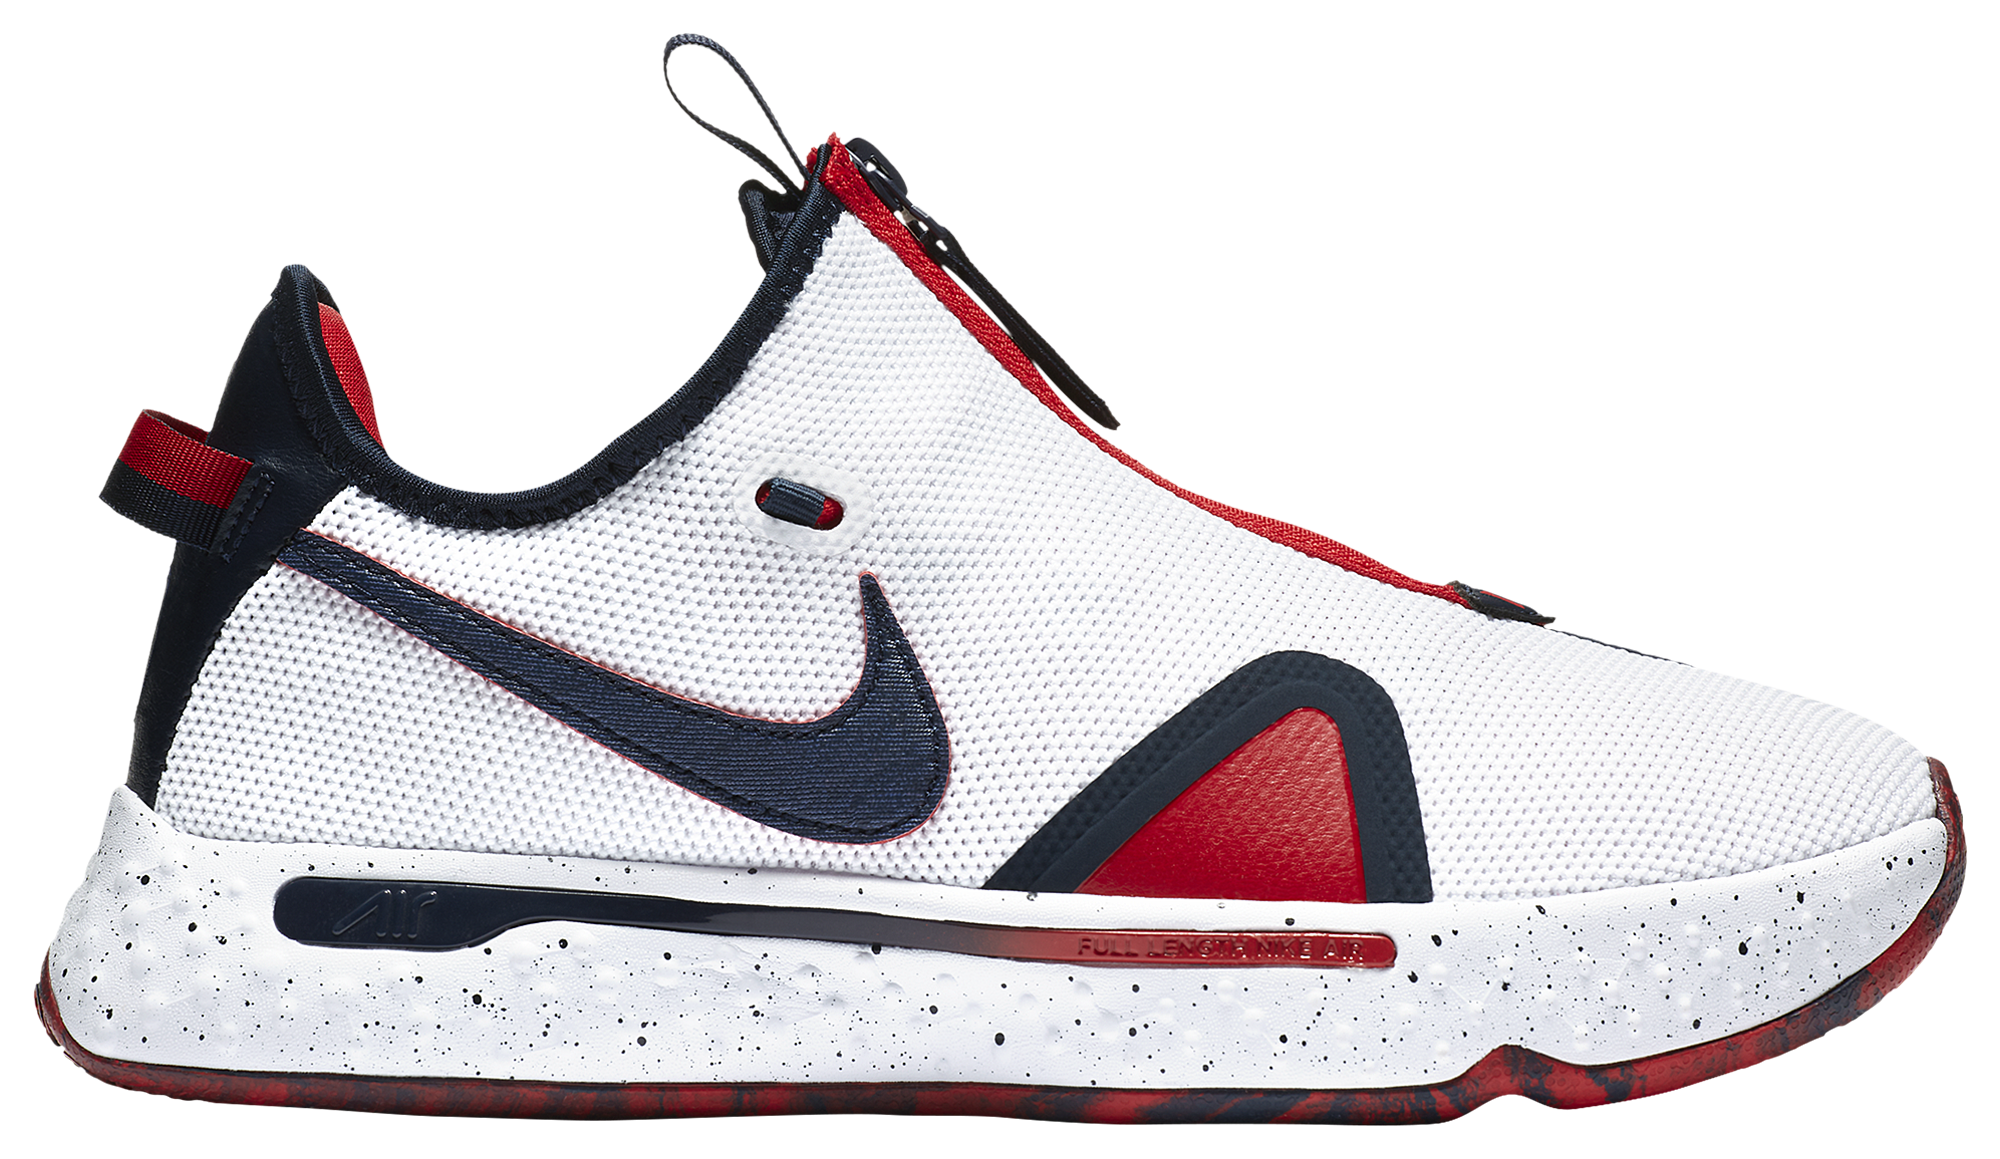 red and white paul george